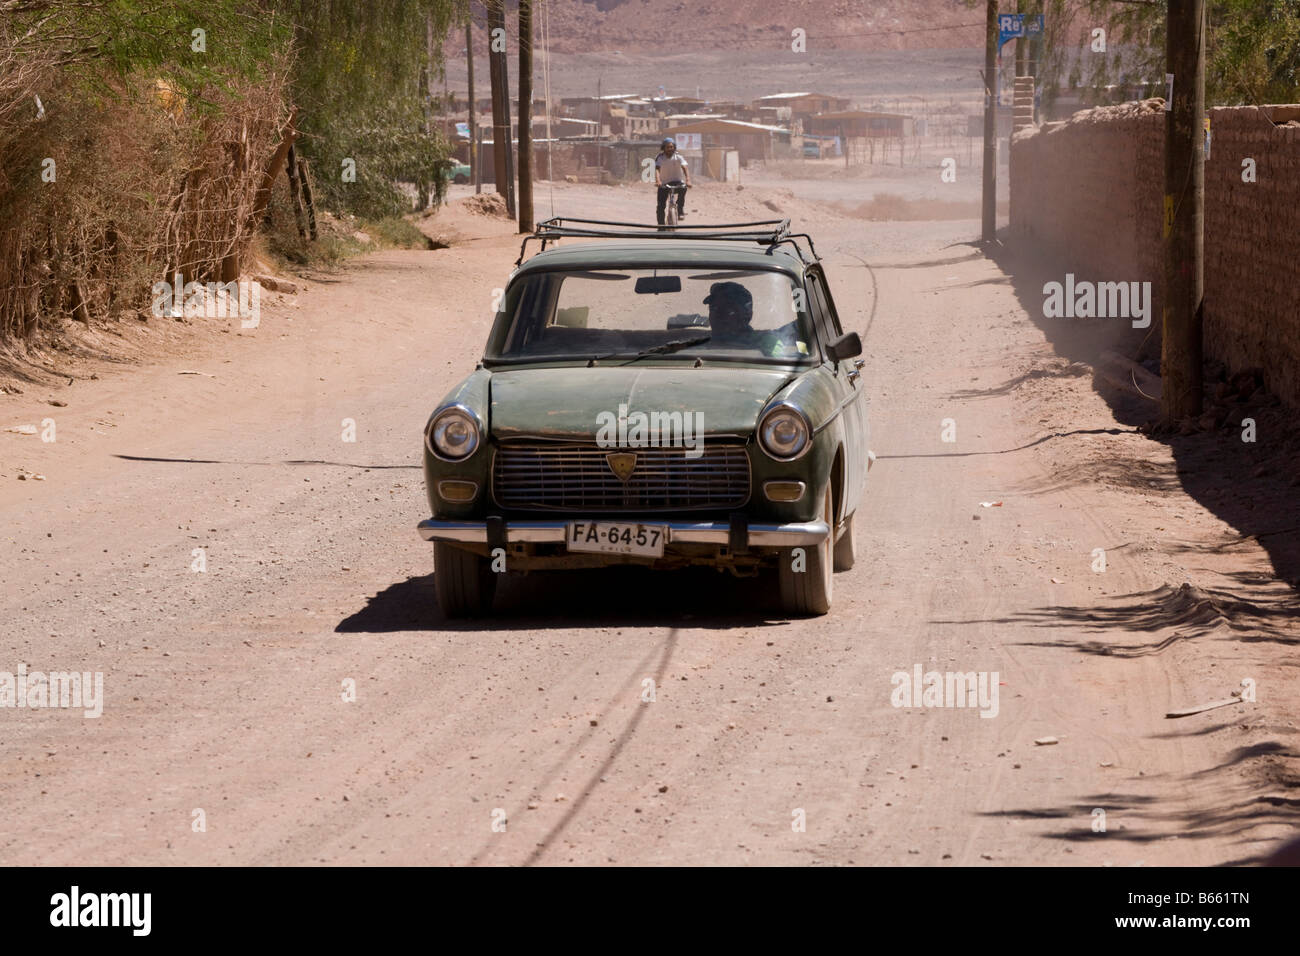 Typical dusty road and old car in San Pedro de Atacama, Chile Stock Photo